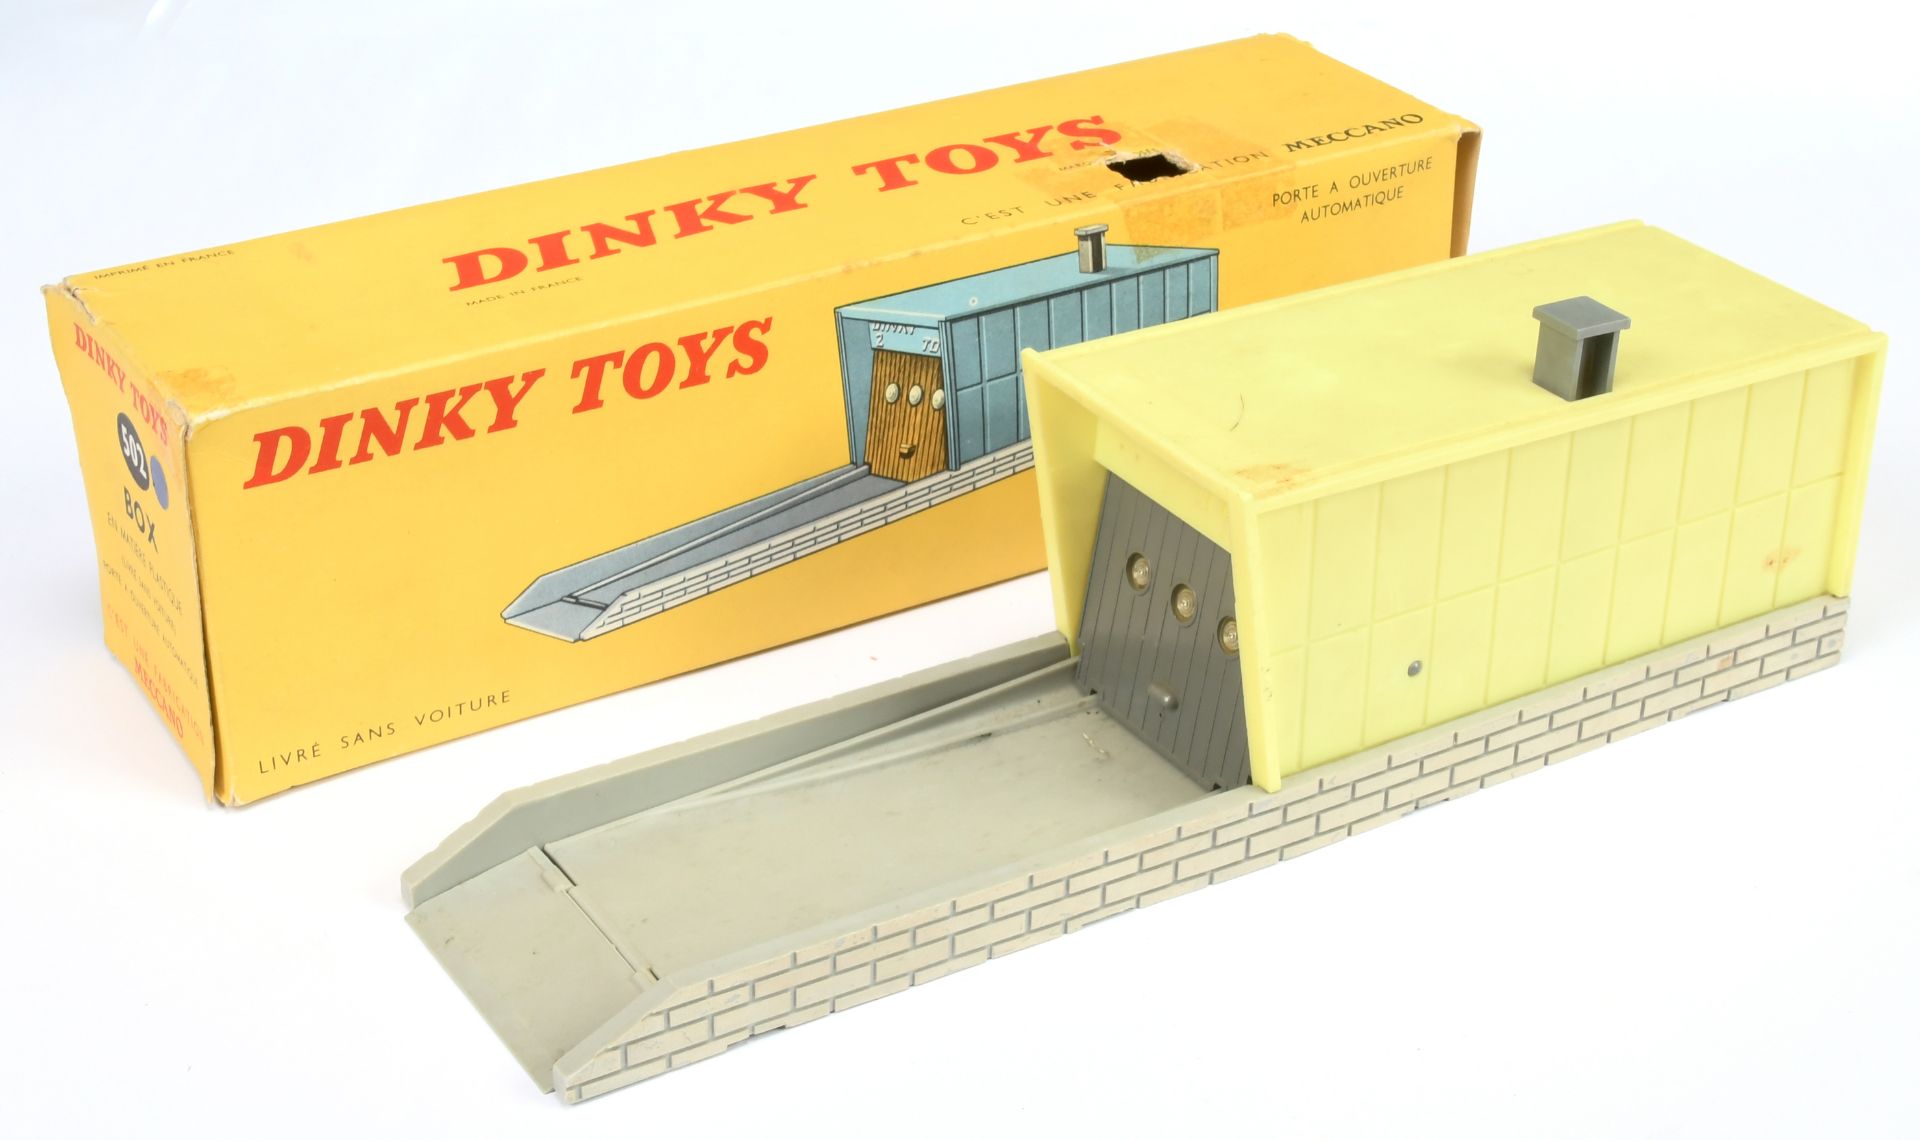 French Dinky Toys 502 Garage - Plastic issue grey base and opening door, with bright yellow garage 